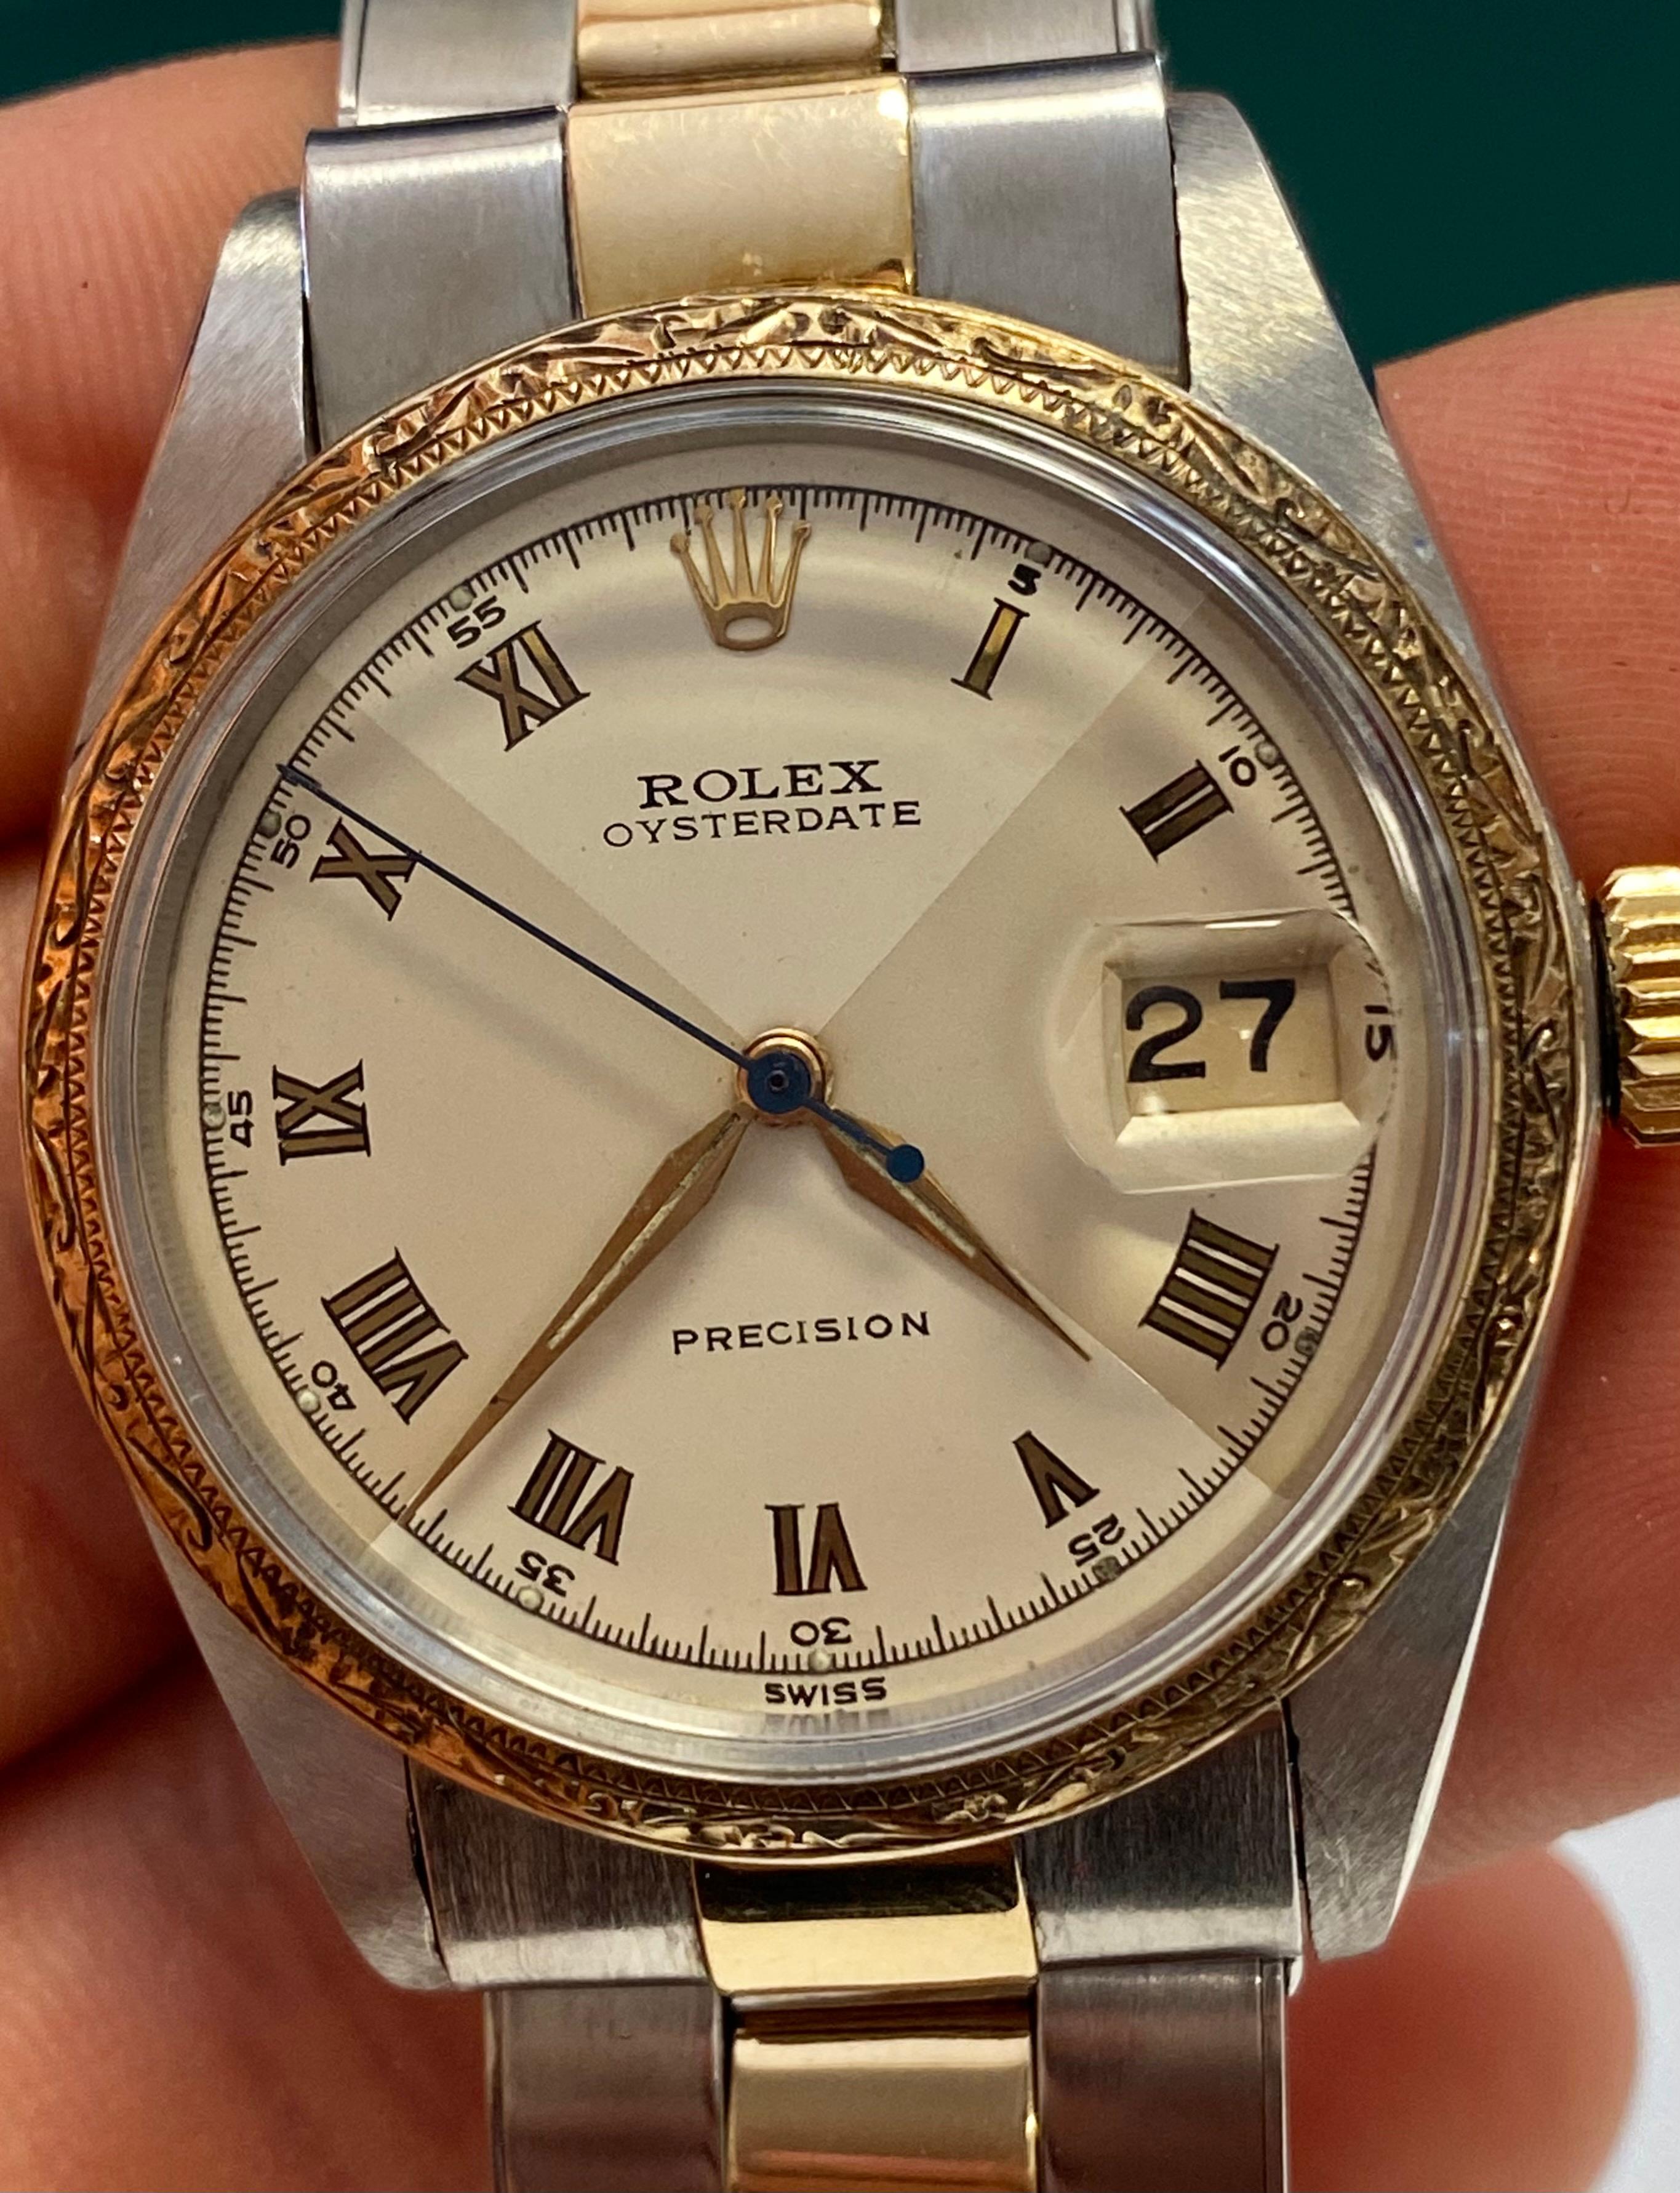 Vintage Rolex Oyster-Date Precision Two Tone Dial 3